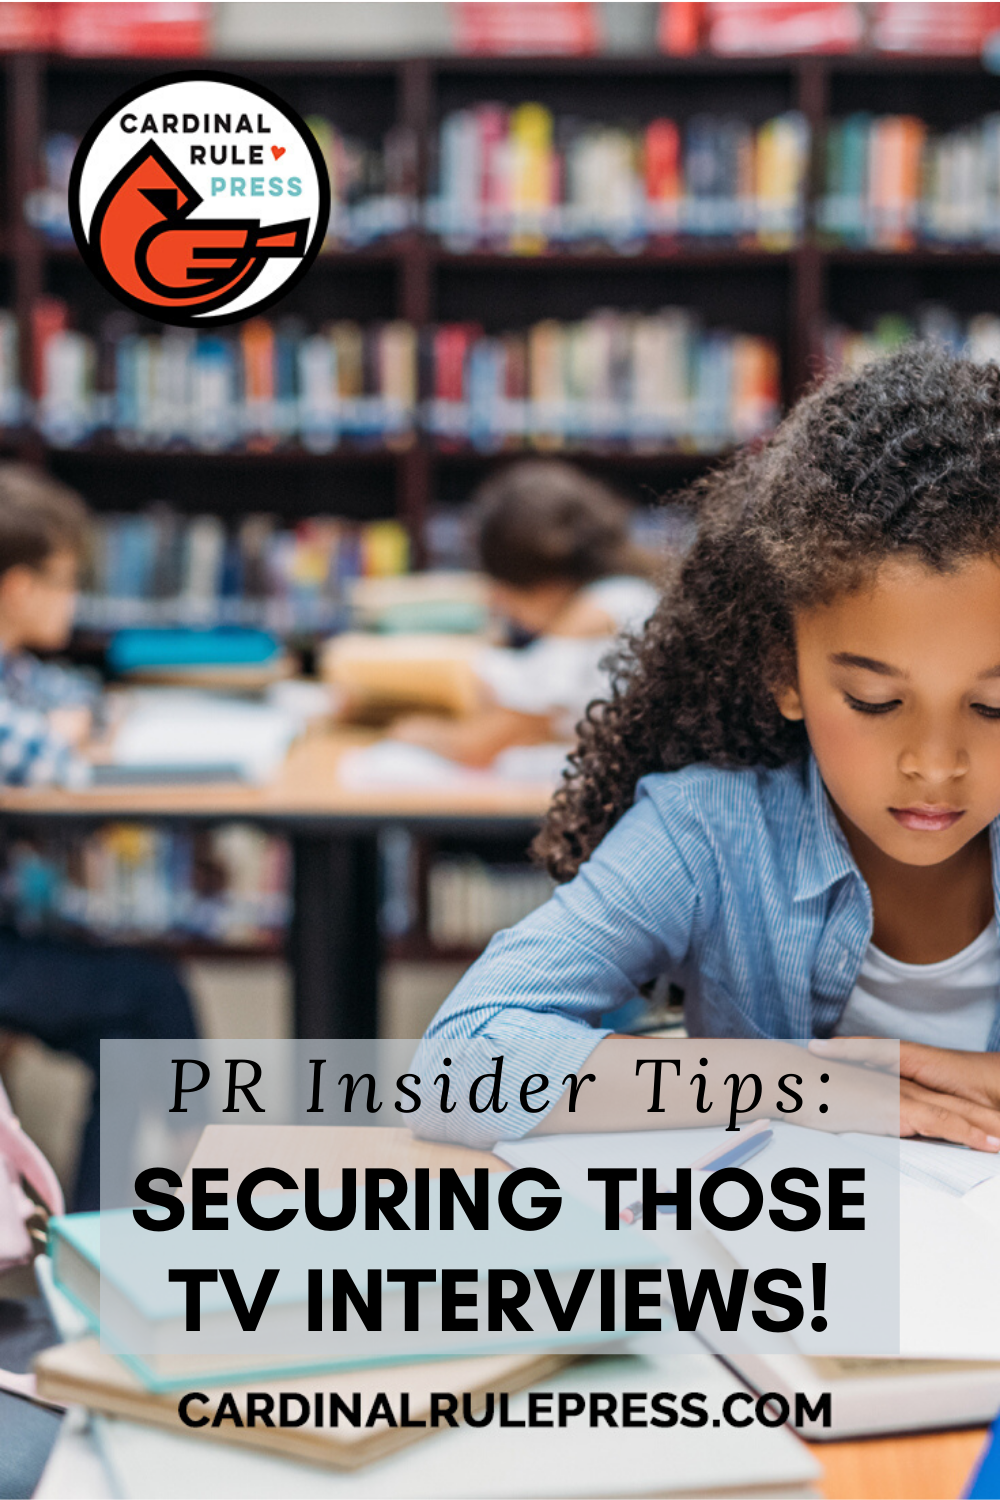 PR Insider Tips: Securing Those TV Interviews! Some INSIDER TIPS on scoring those media interviews we all want! Whether you have a new book to promote, an event to publicize or maybe you’re looking to boost awareness about a new literacy initiative at your library, business or school, these tips can get you there - and on-air! #PublicRelations #Booksellers #Librarians #InsiderTips